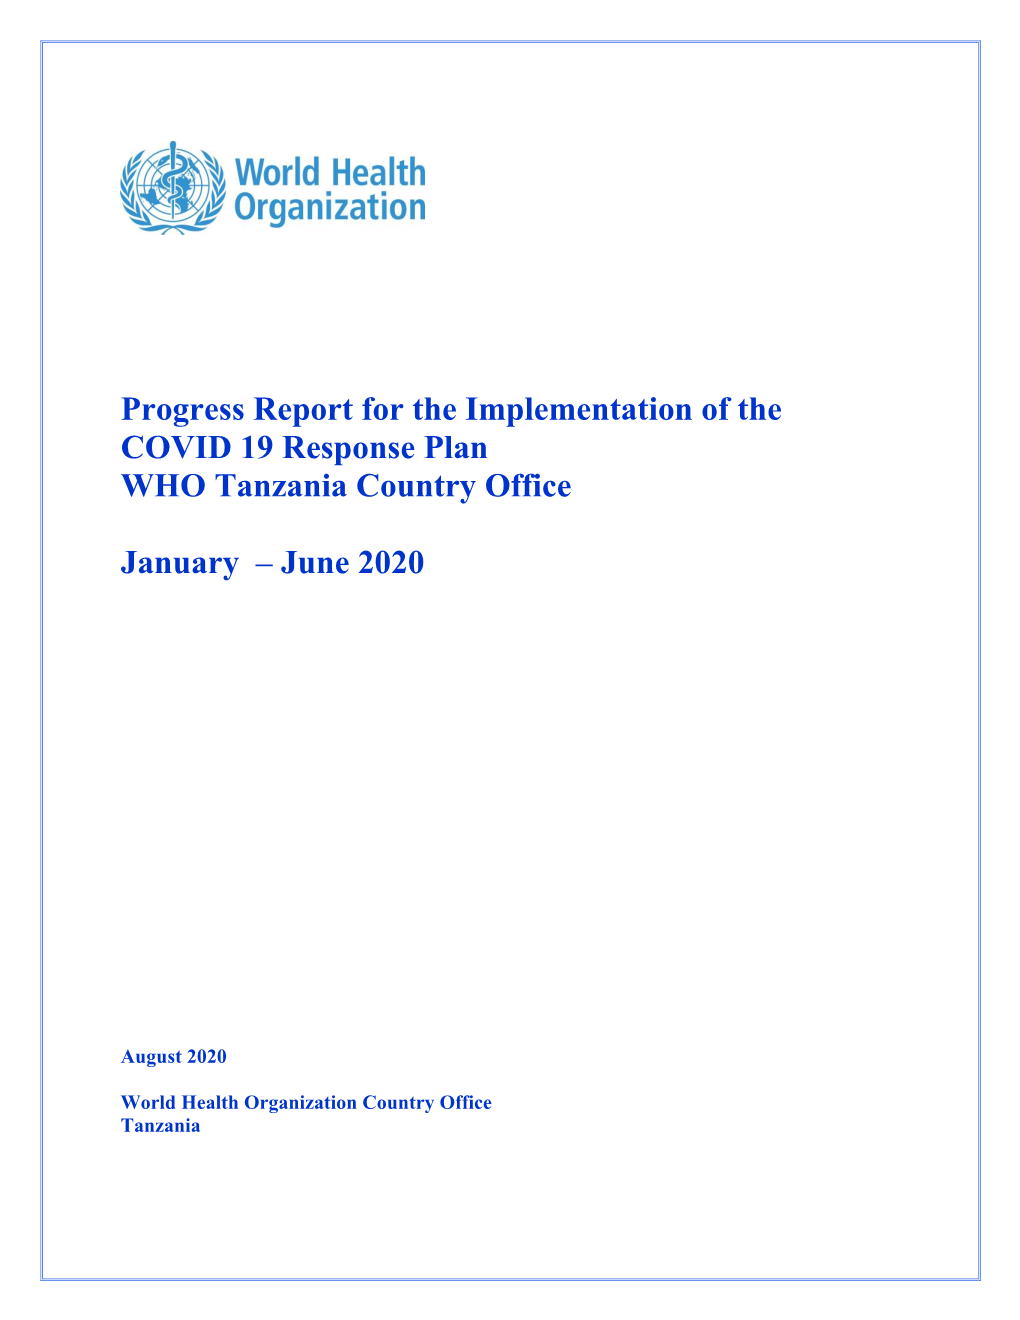 Progress Report for the Implementation of the COVID 19 Response Plan WHO Tanzania Country Office